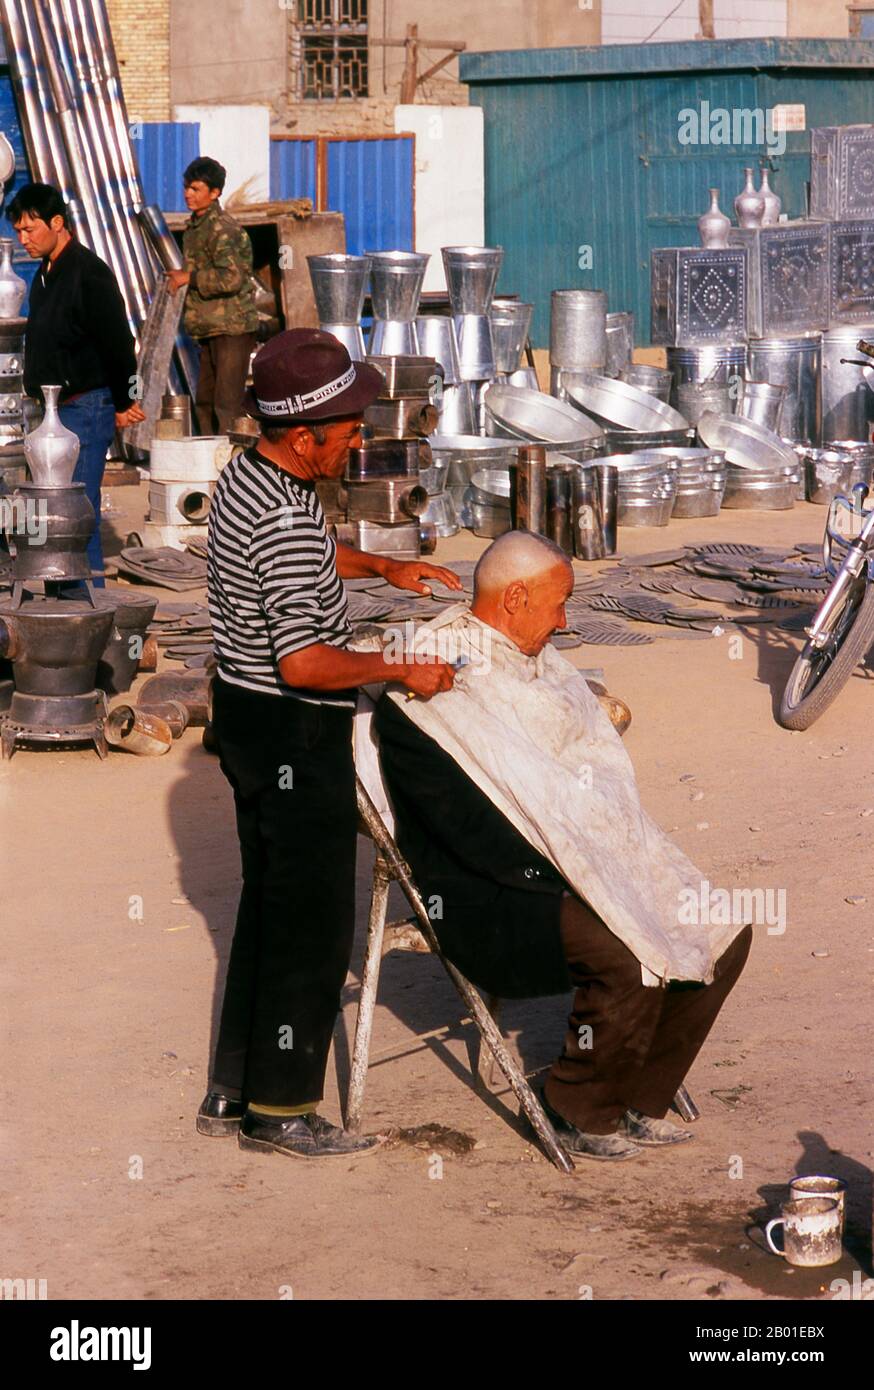 China: Outdoor barber, Old Kuqa, Xinjiang Province.  The ancient oasis town of Kuqa (Kuche), though now overshadowed by Korla to the east and Aksu to the west, was once a key stop on the Northern Silk Road. It first came under Han Chinese control when it was conquered, in 91 CE, by the indomitable General Ban Chao.  By the 4th century it had emerged as an important centre of Tocharian civilisation sitting astride not just the Northern Silk Road, but also lesser routes to Dzungaria in the north and Khotan in the south. The celebrated Buddhist monk Kumarajiva was born here. Stock Photo